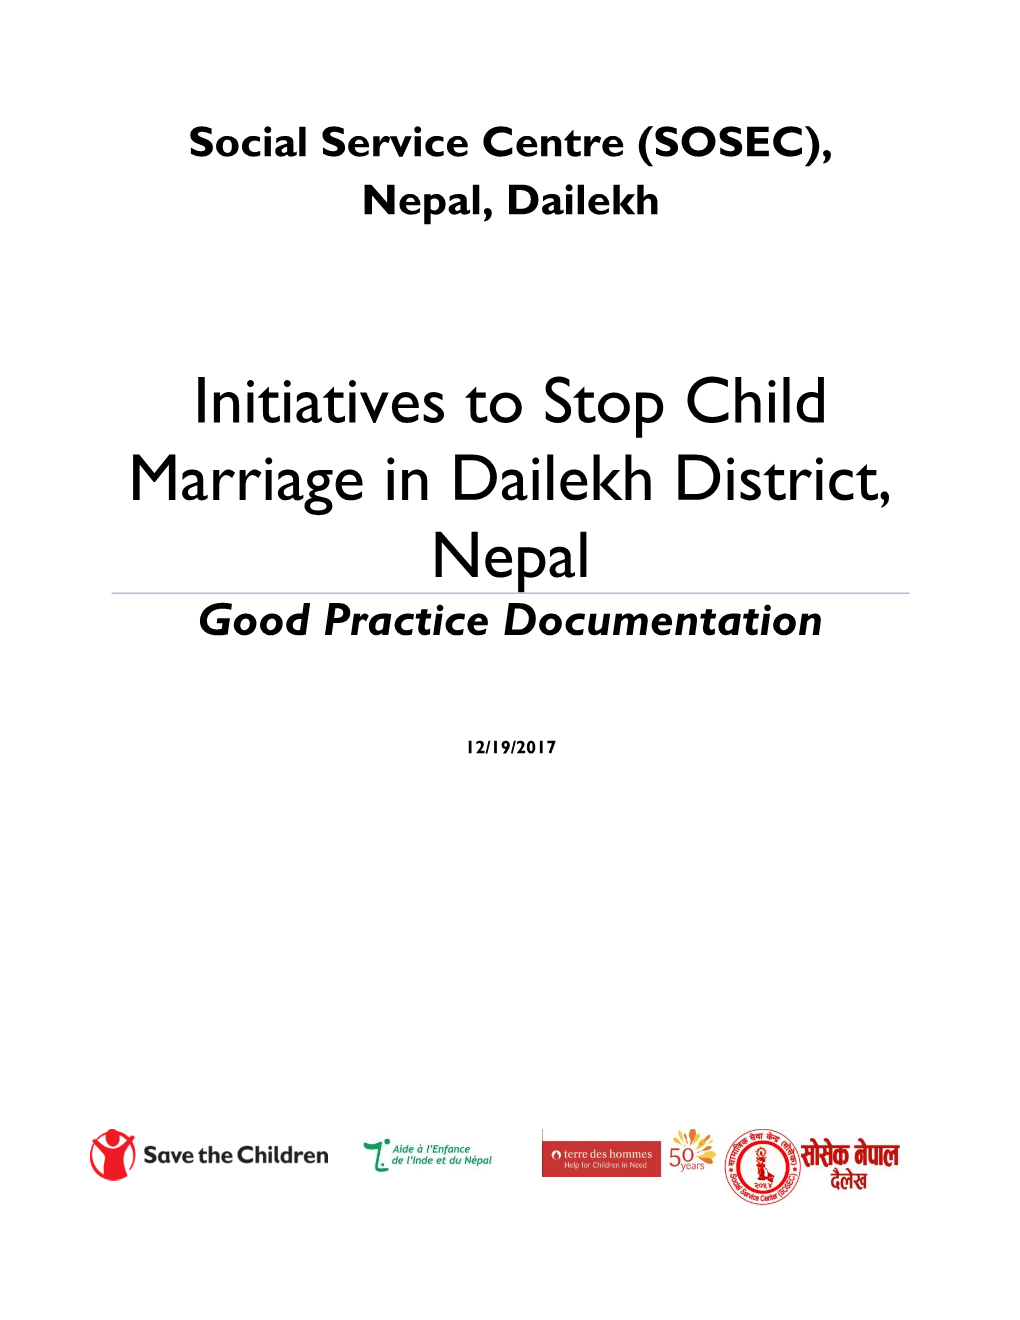 Initiatives to Stop Child Marriage in Dailekh District, Nepal Good Practice Documentation